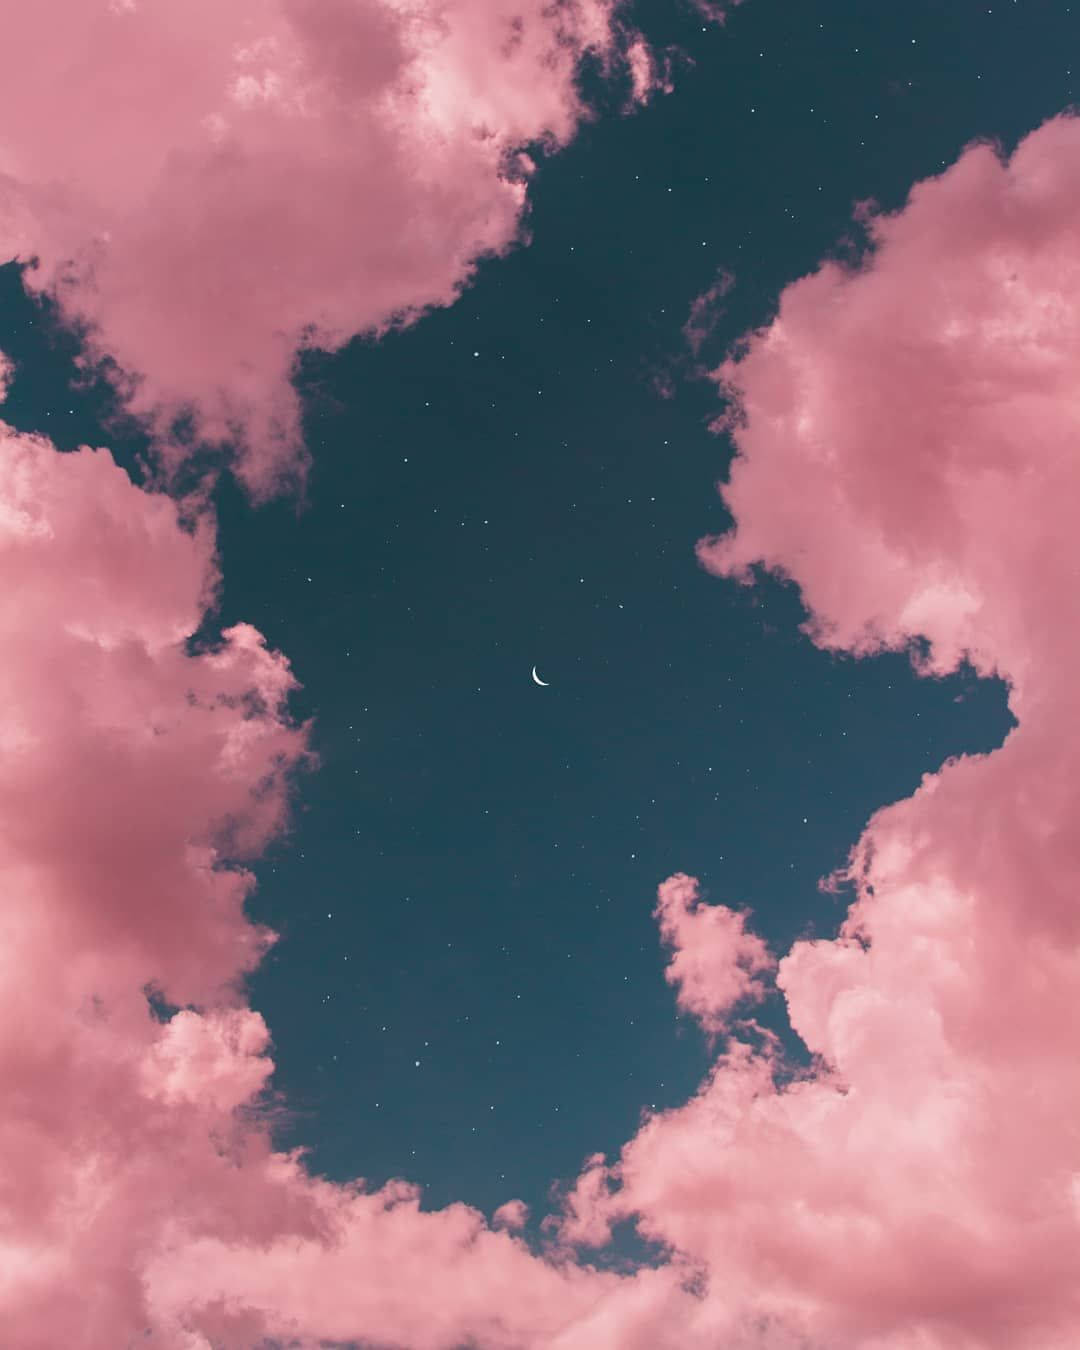 Heavenly Pink Clouds In The Sky Wallpaper